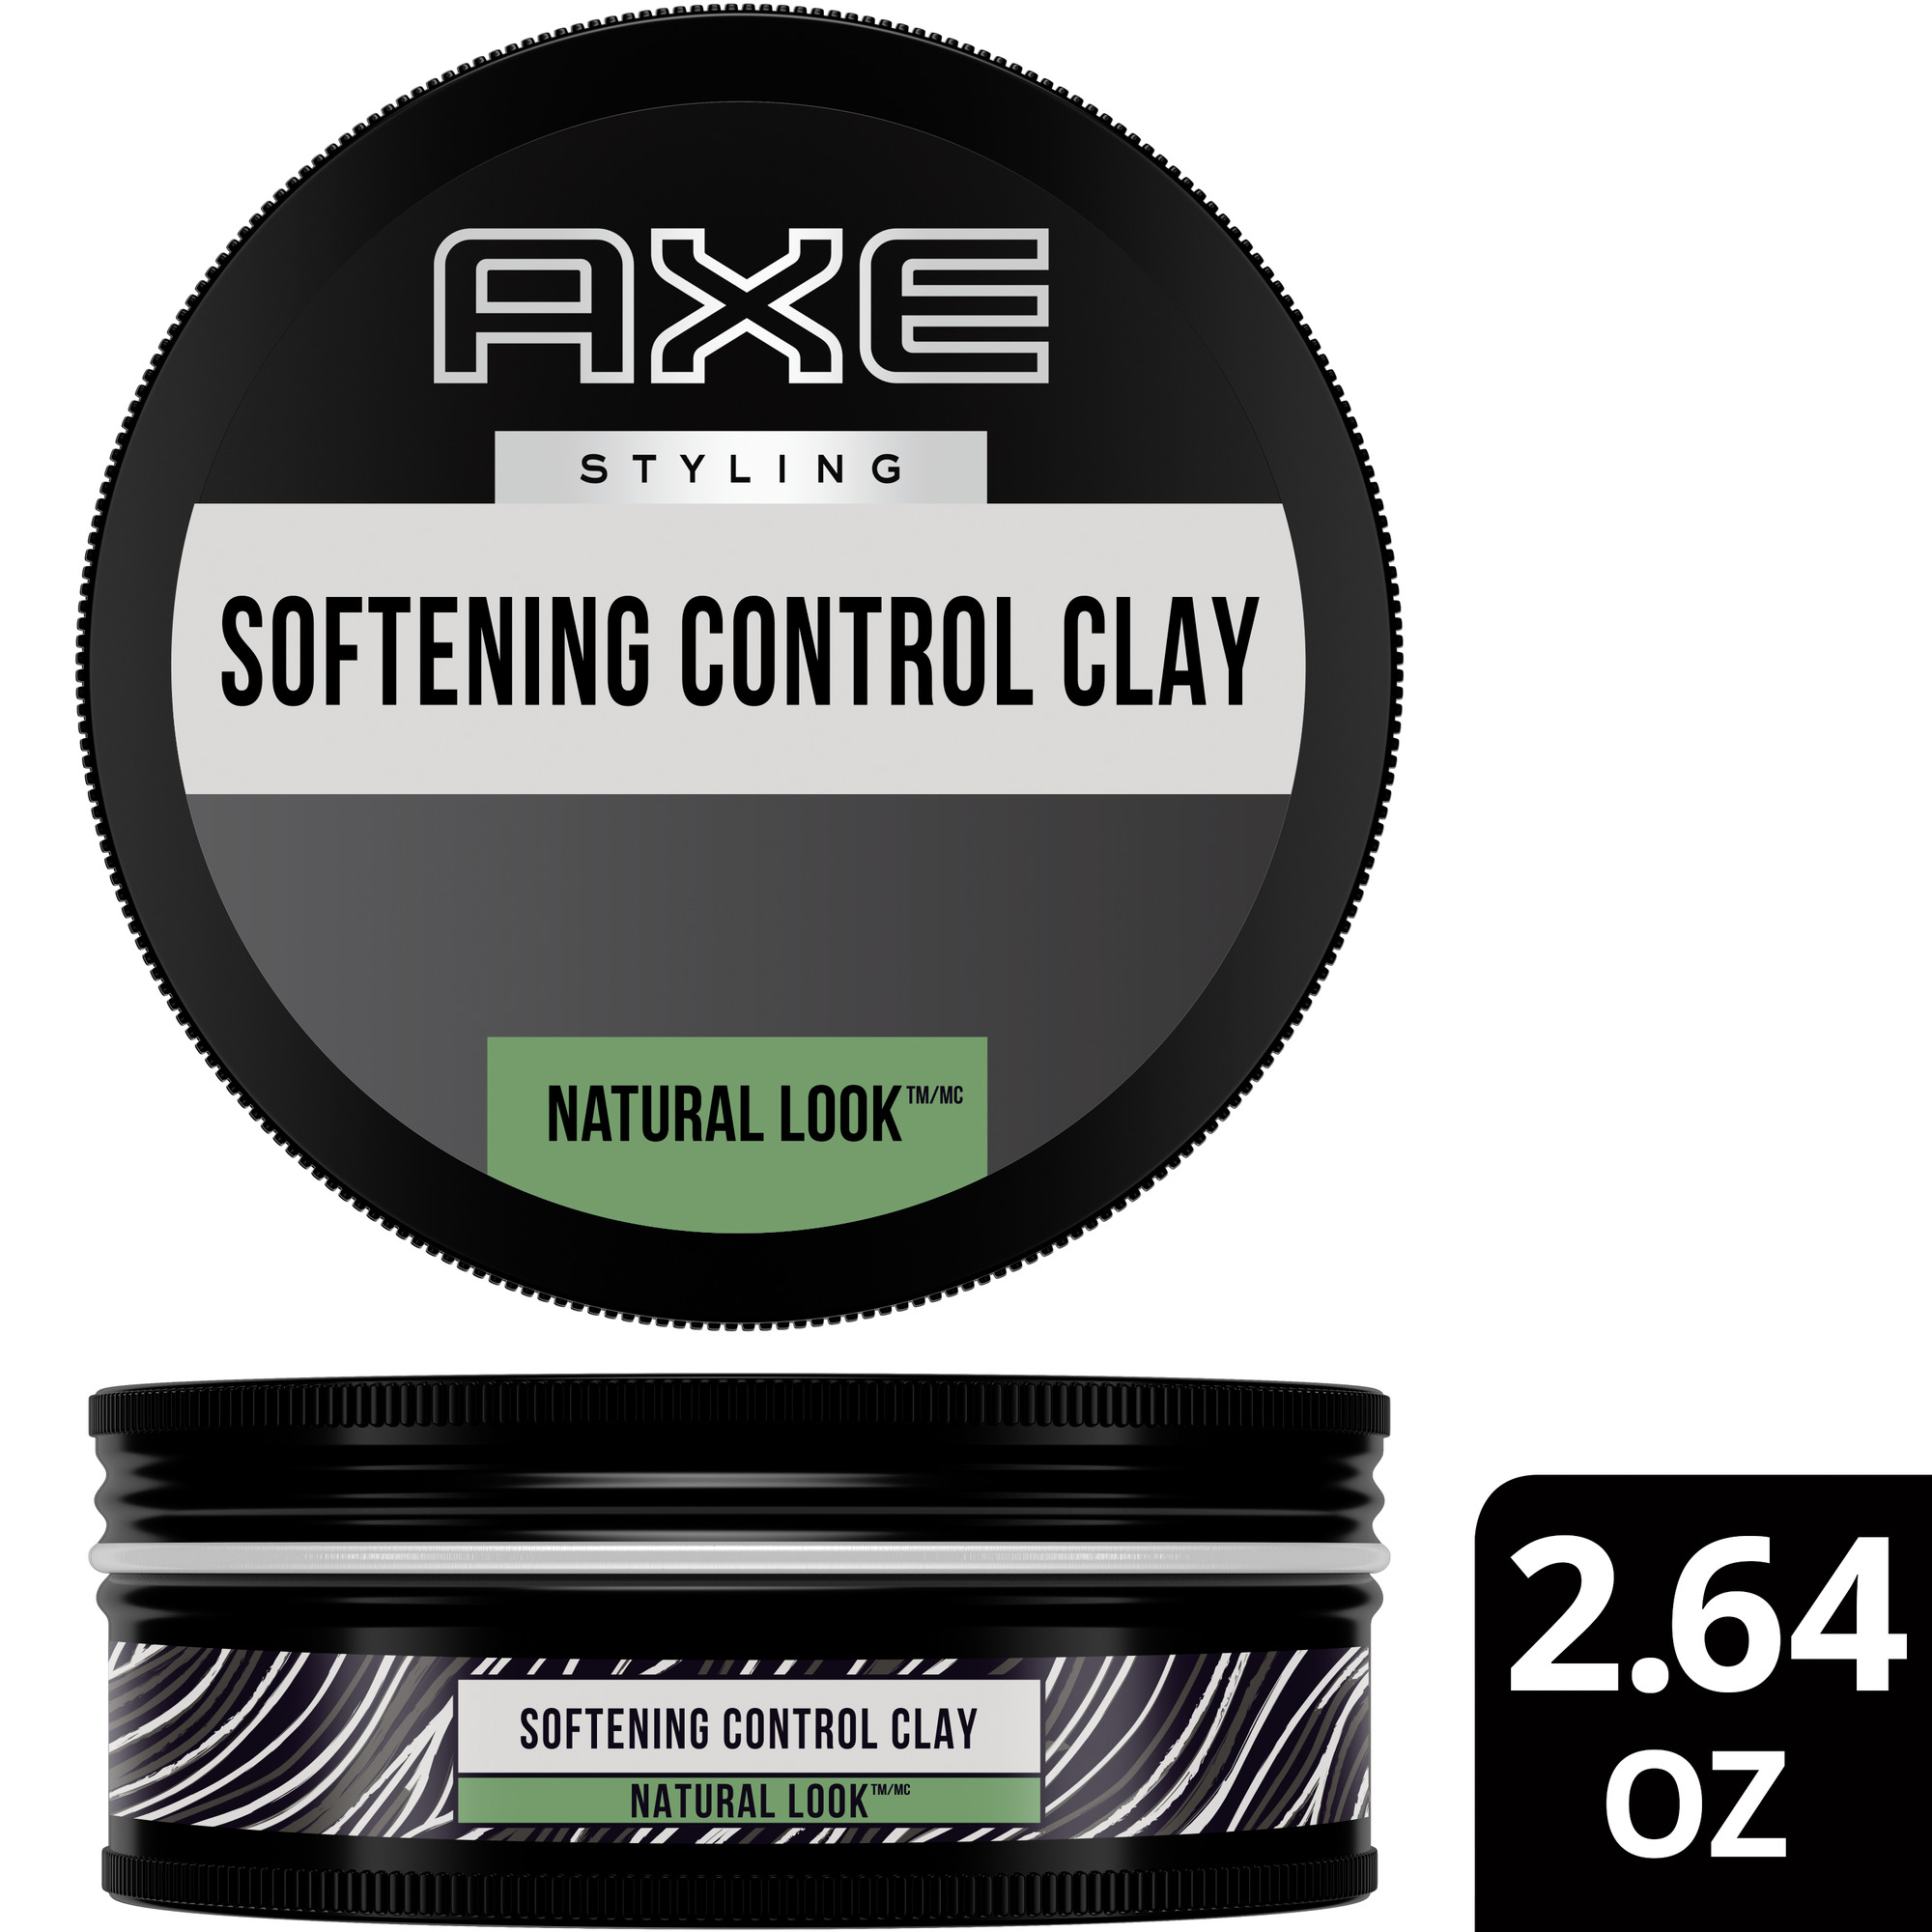 Axe Natural Look Color Protection Softening Hair Styling Cream, 2.64 oz, Travel Size - image 1 of 4